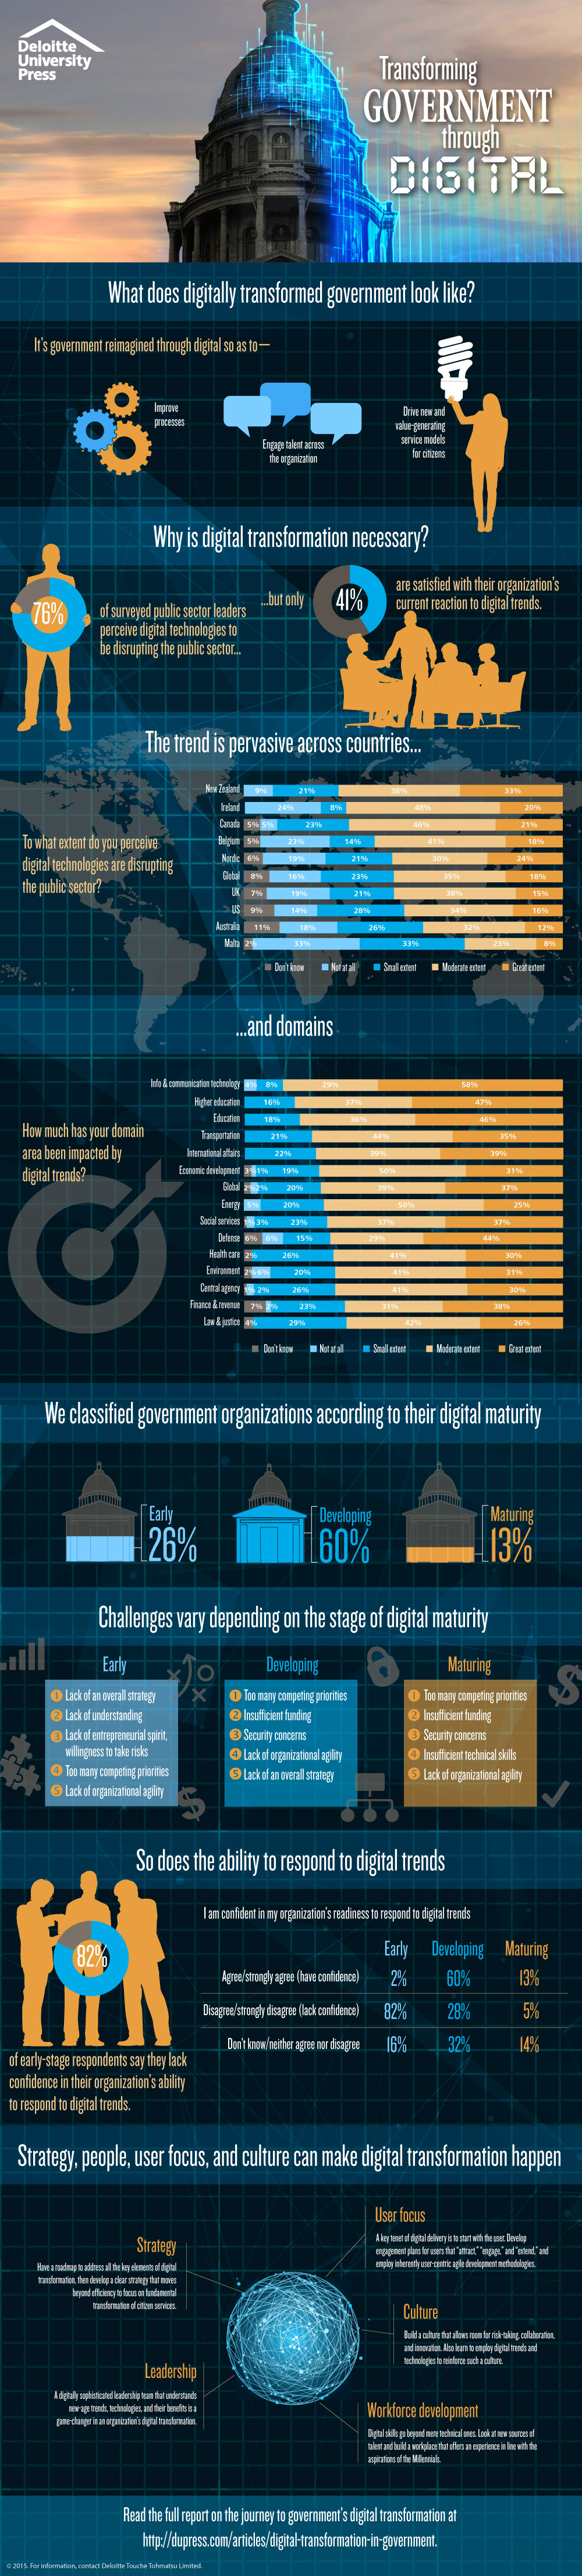 The journey to government's digital transformation